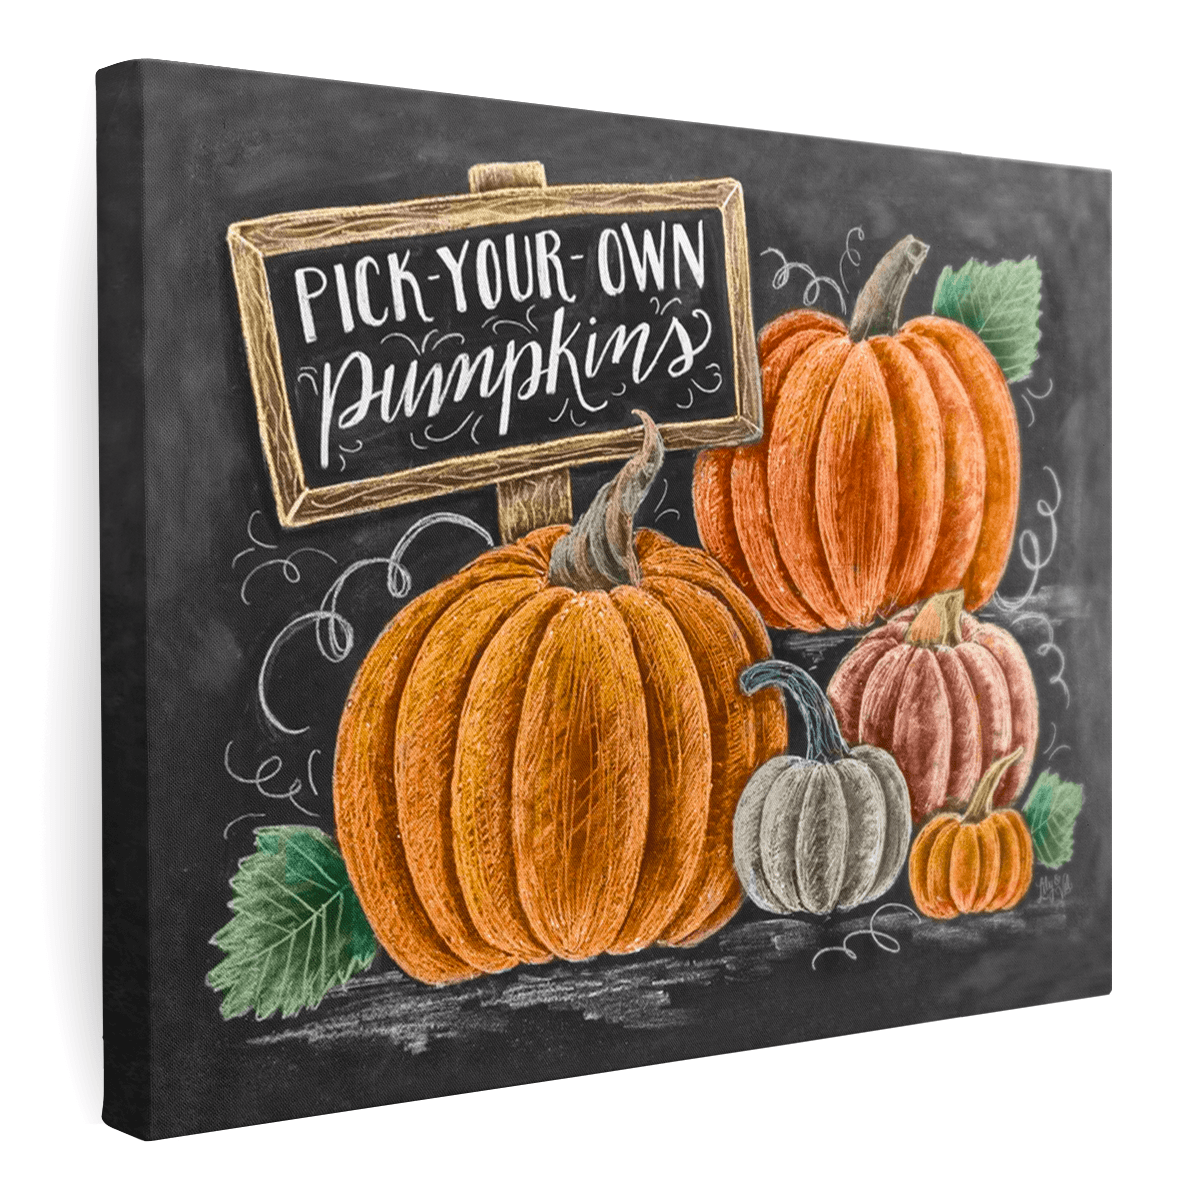 Pick-Your-Own Pumpkins